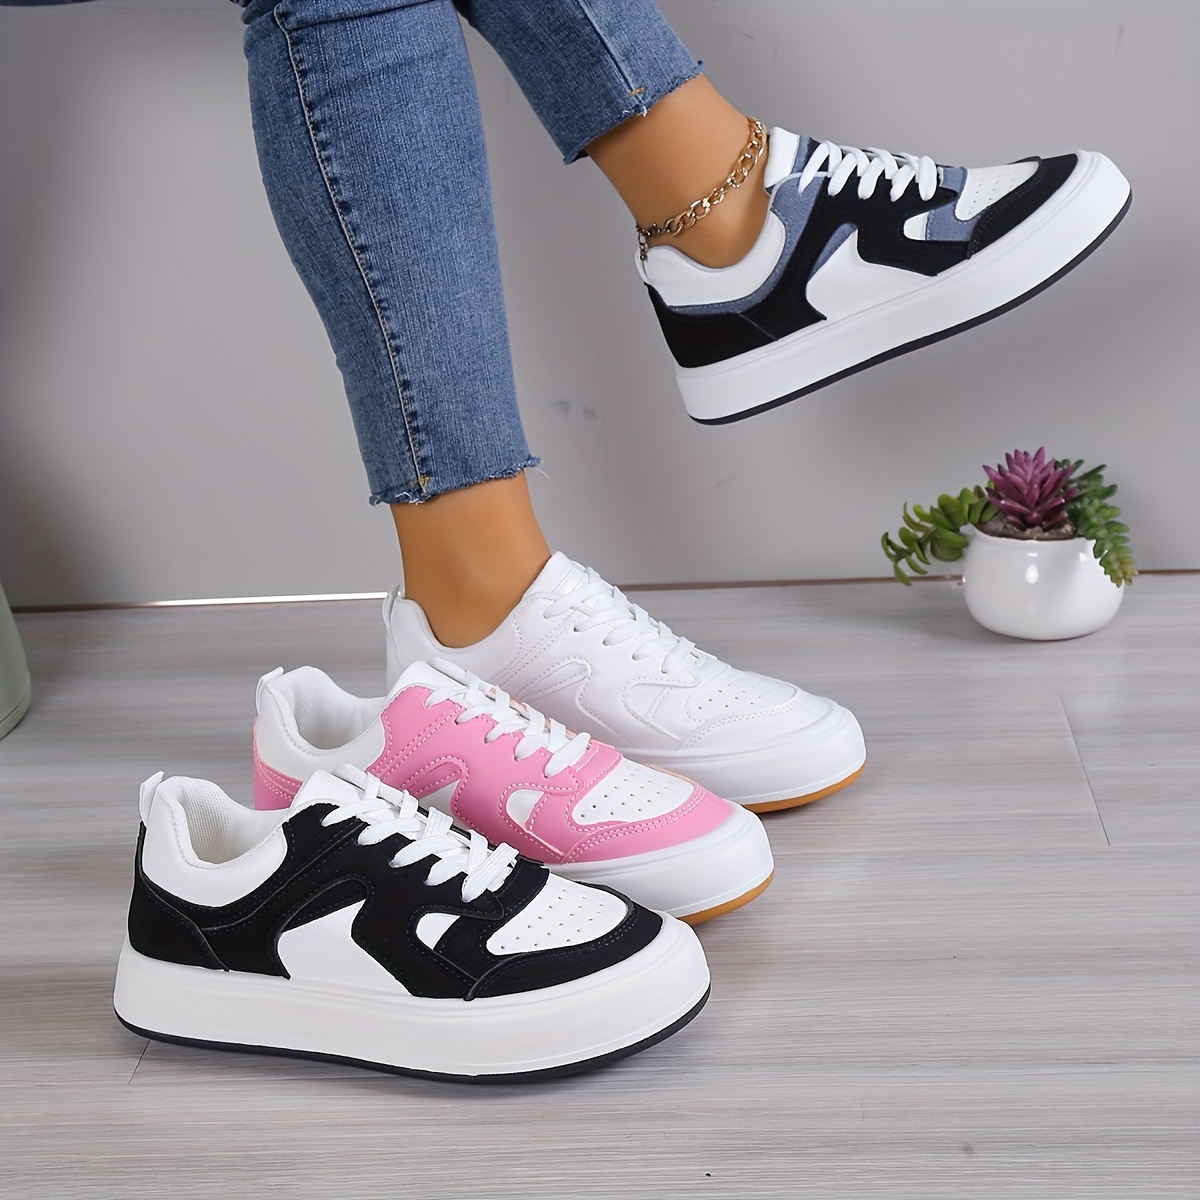 womens colorblock skate shoes versatile low top lace up sports shoes casual flat sneakers details 1